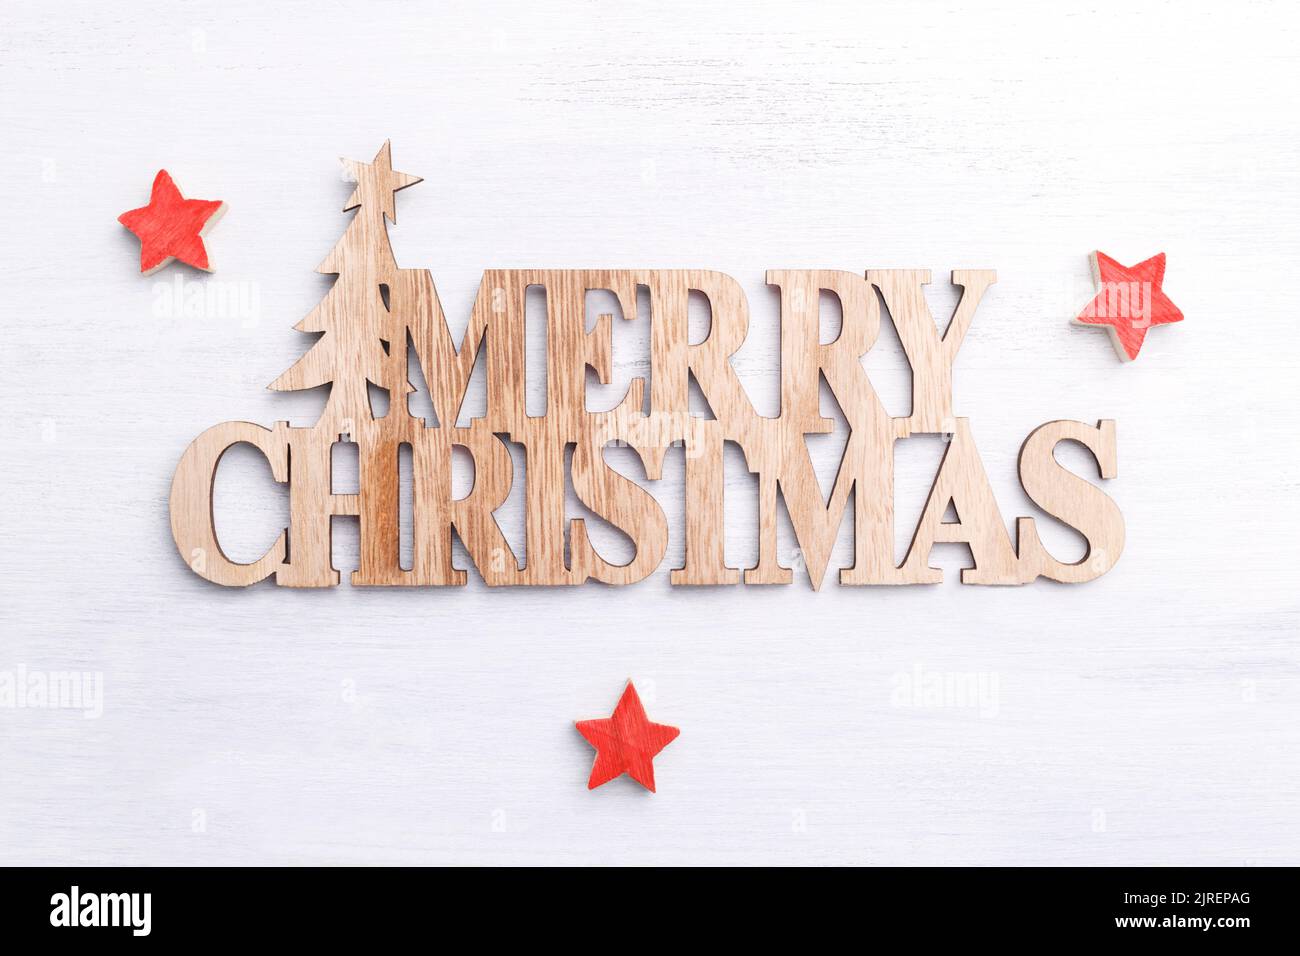 Merry Christmas wooden letters, festive decoration, greetings card template Stock Photo